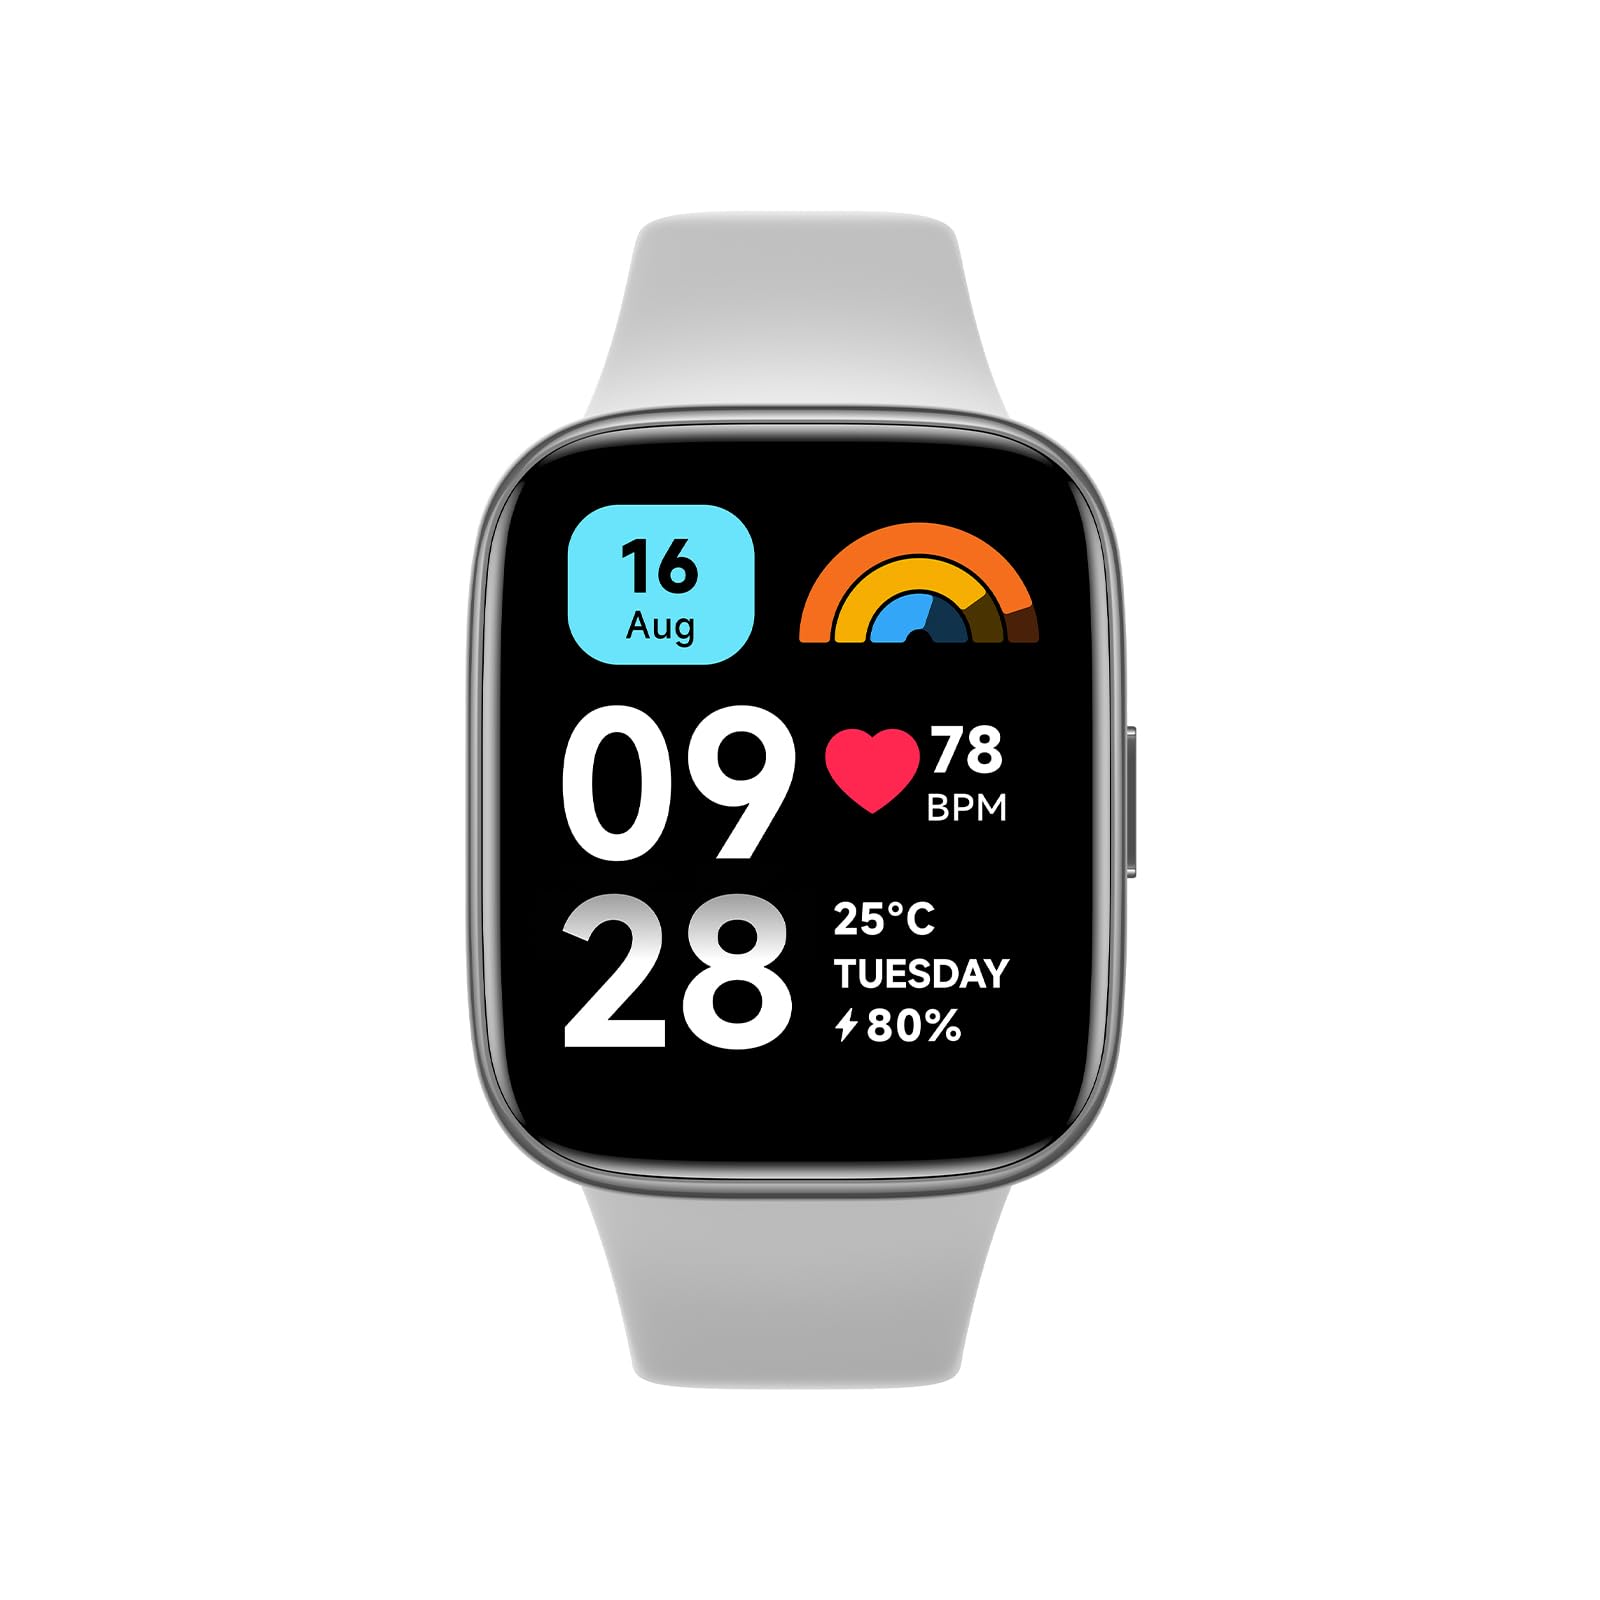 Xiaomi Redmi Smart Watch 3 Active Gray| 1.83 Inch Big LCD Display, 5ATM Water Resistant, 12 Days Battery Life, GPS, 100+ Workout Mode, Heart Rate Monitor, Full Scale Fitness Tracking